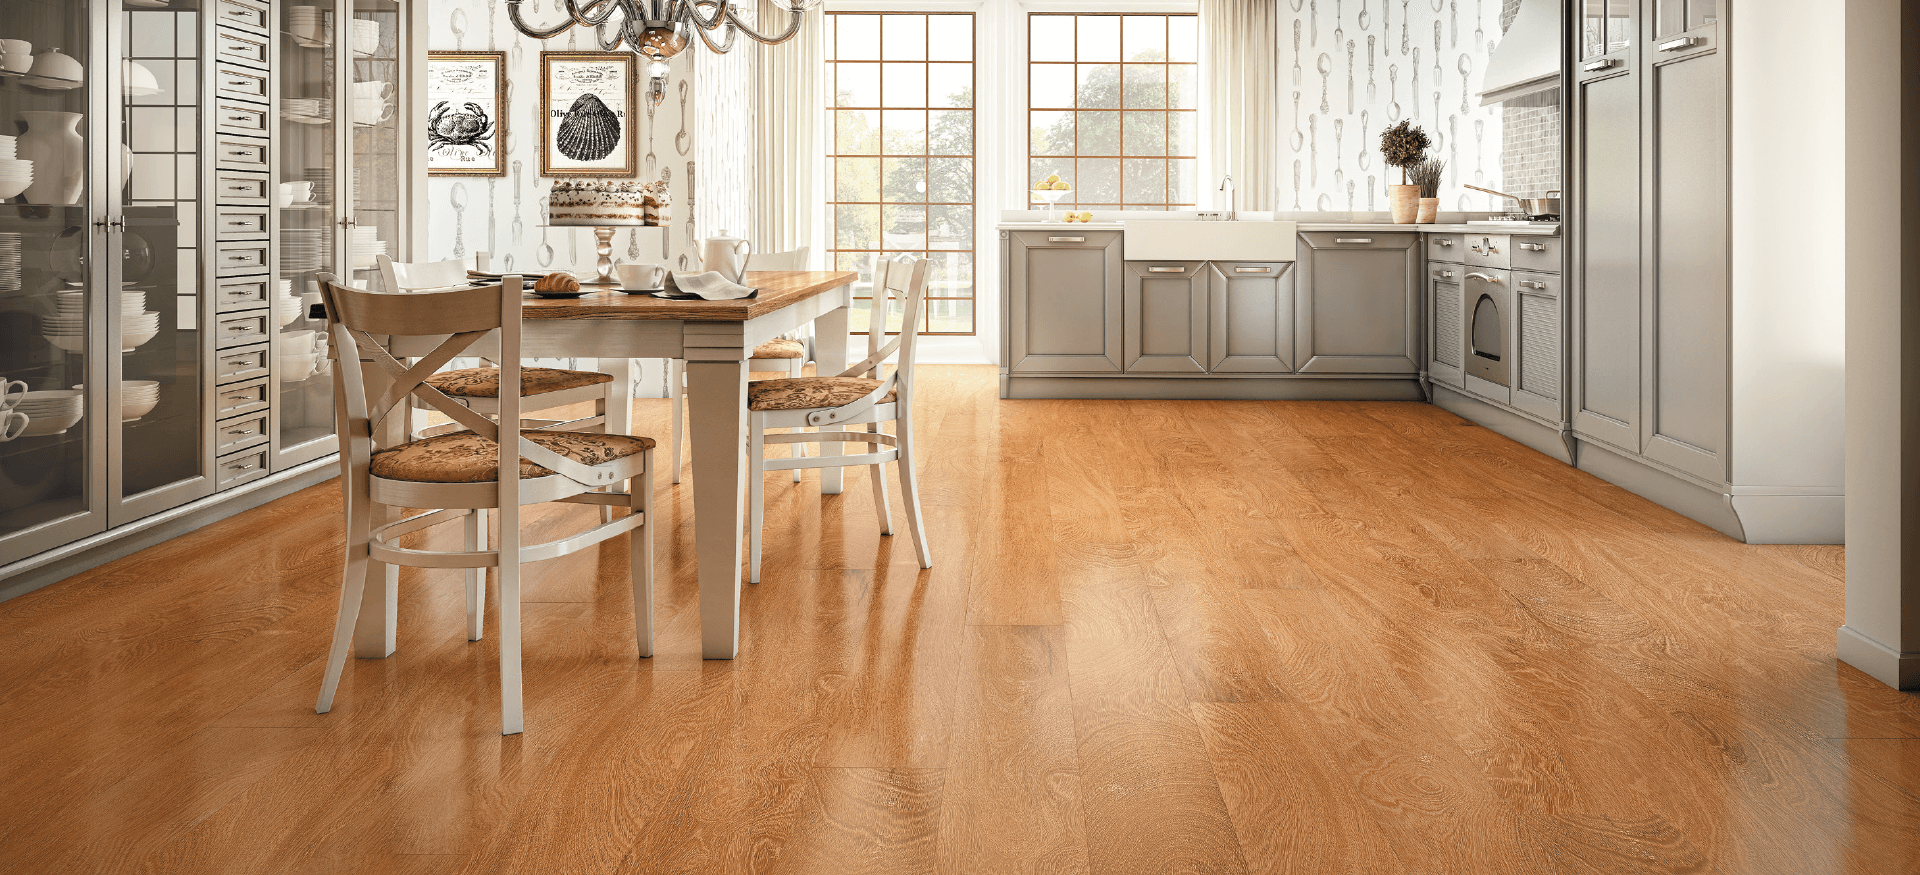 What Type of Flooring Adds the Most Value to a Home